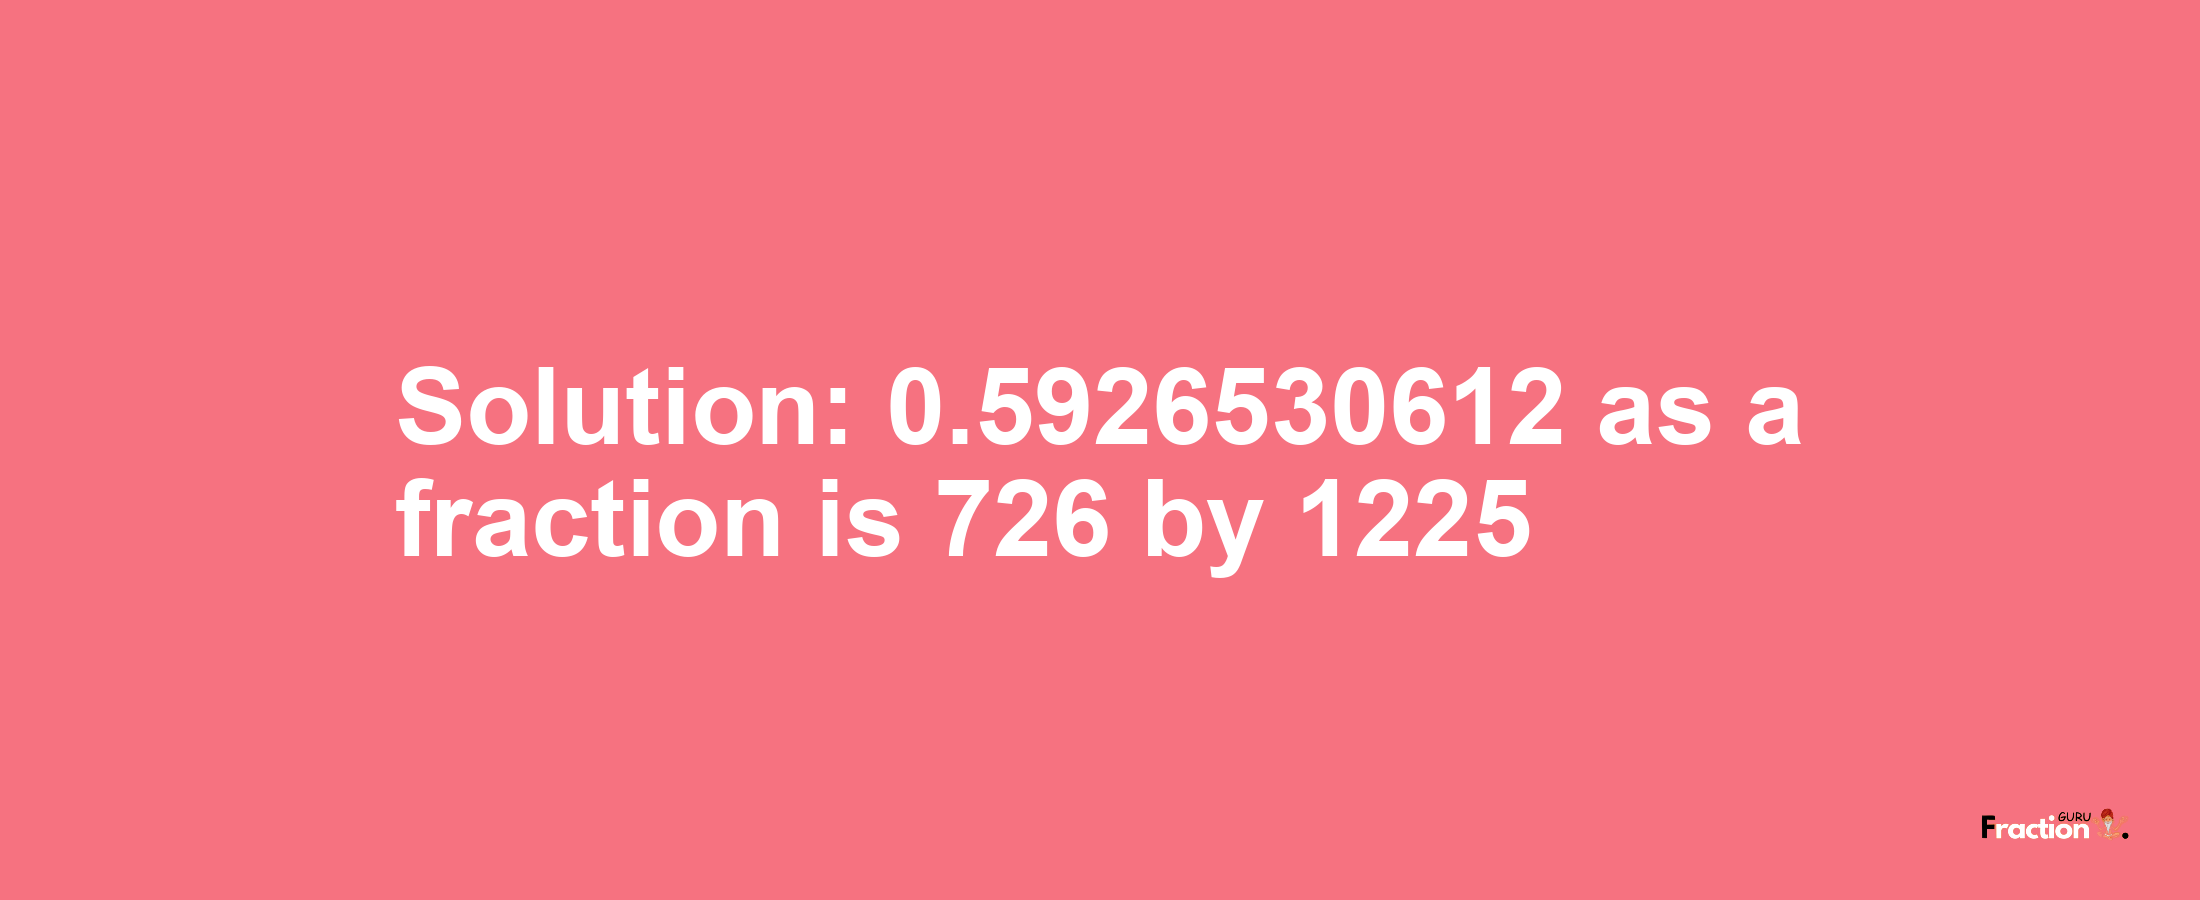 Solution:0.5926530612 as a fraction is 726/1225